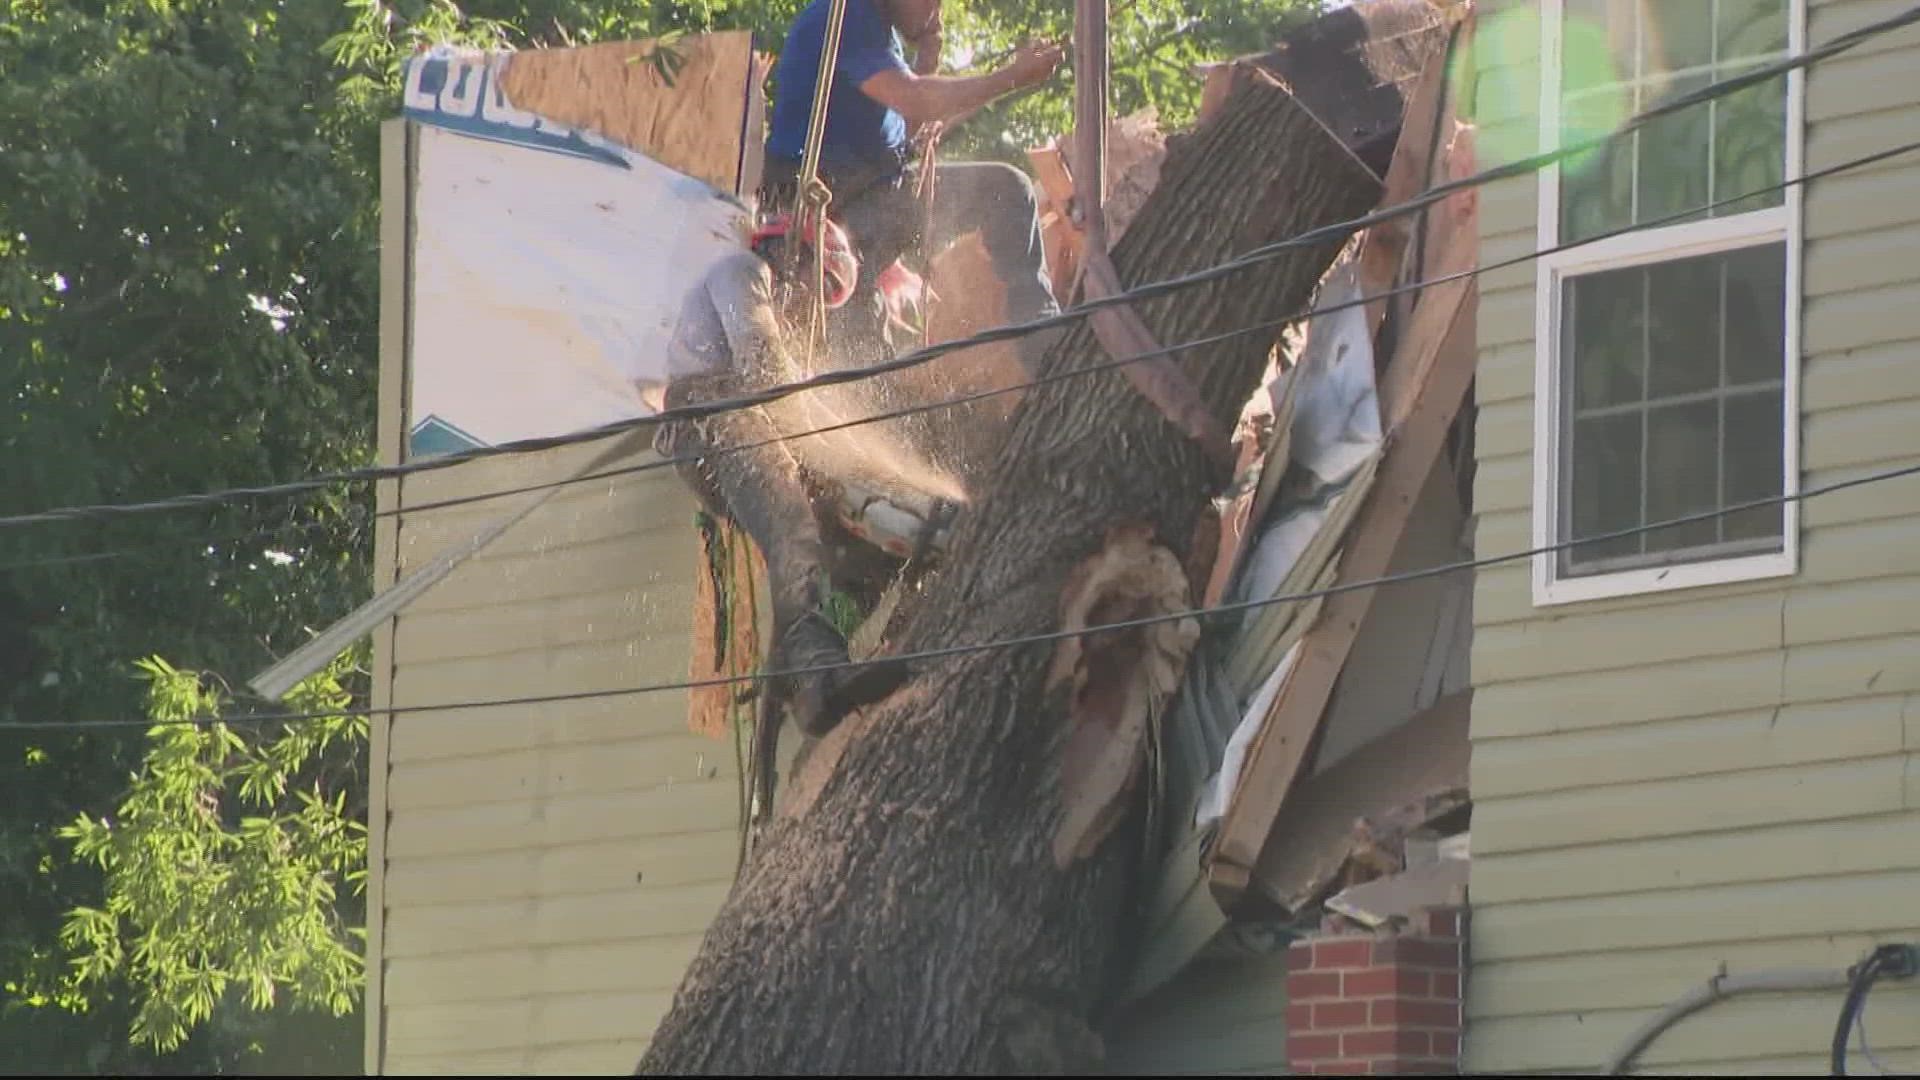 Tuesday's severe weather knocked down trees and power lines. Many residents are still in the dark Thursday.